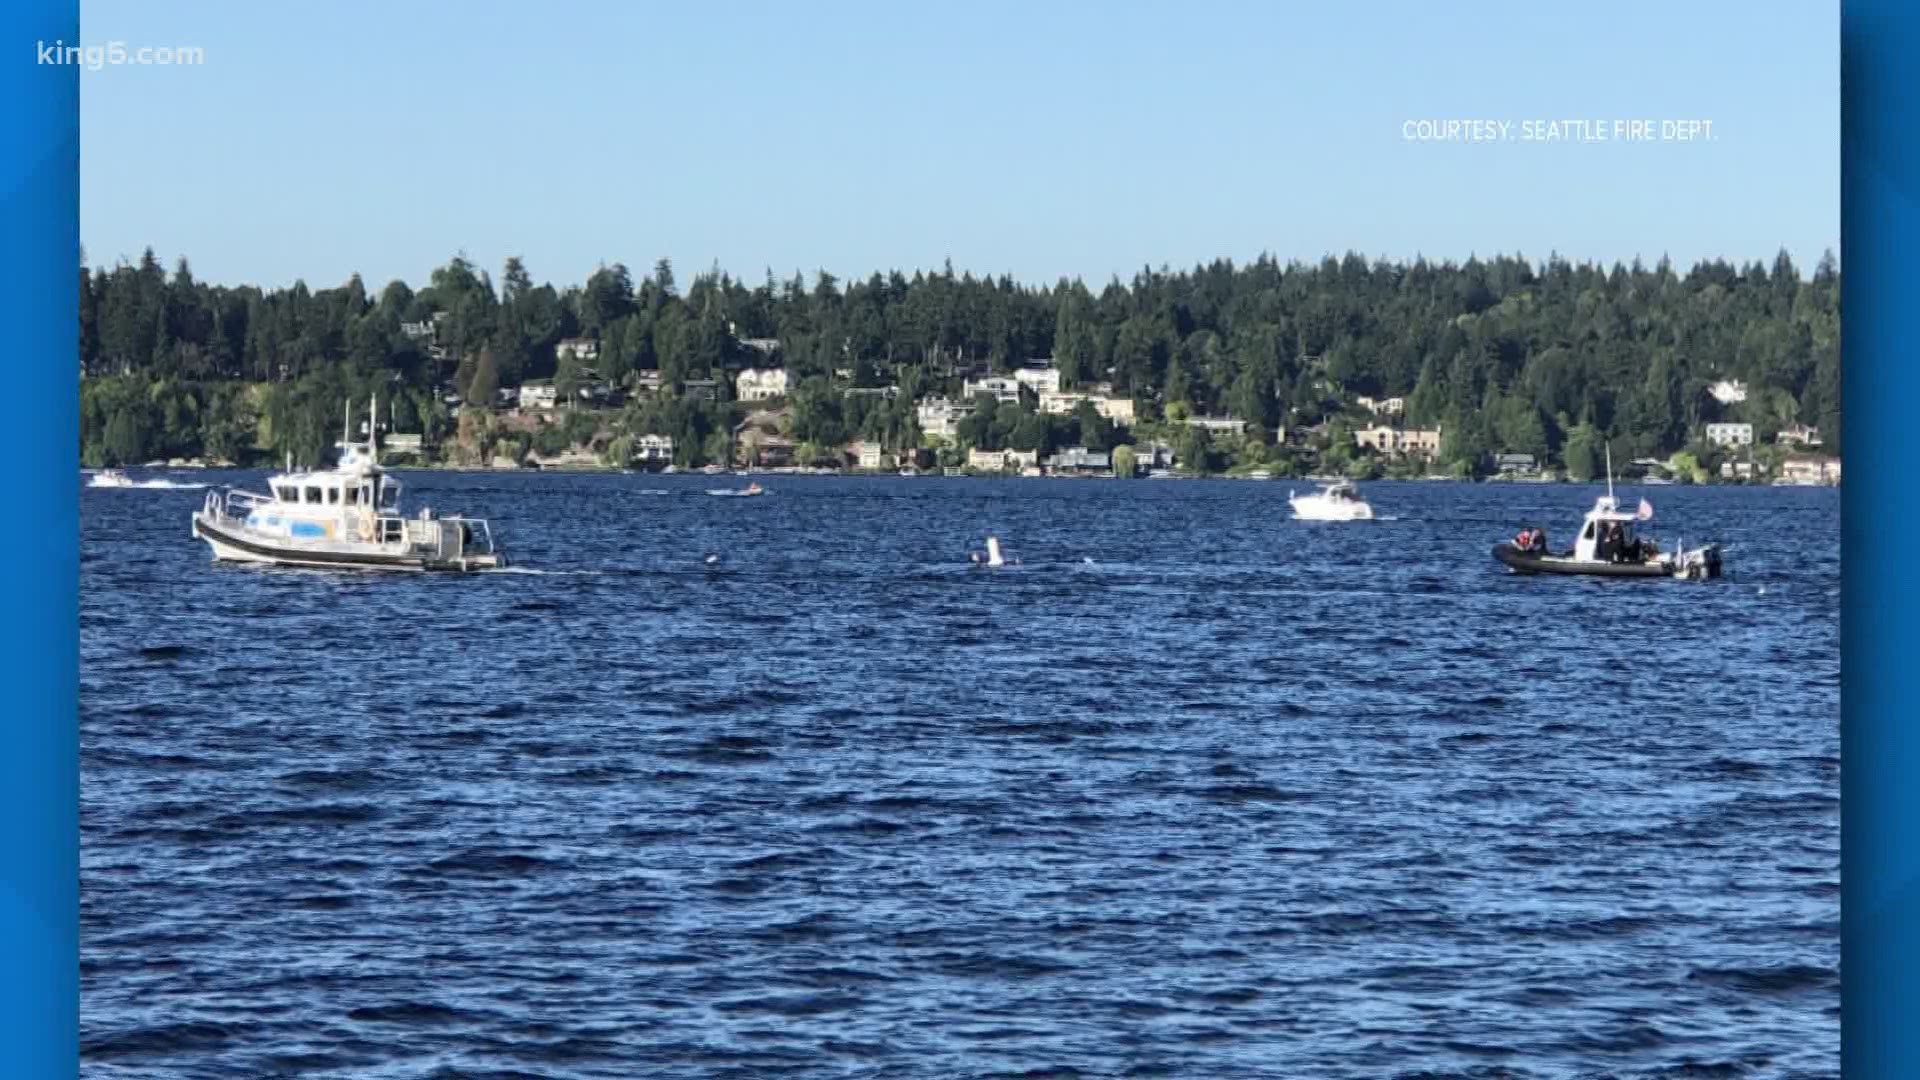 Dive teams were unable to find two people who went missing in the waters of Lake Washington Sunday.